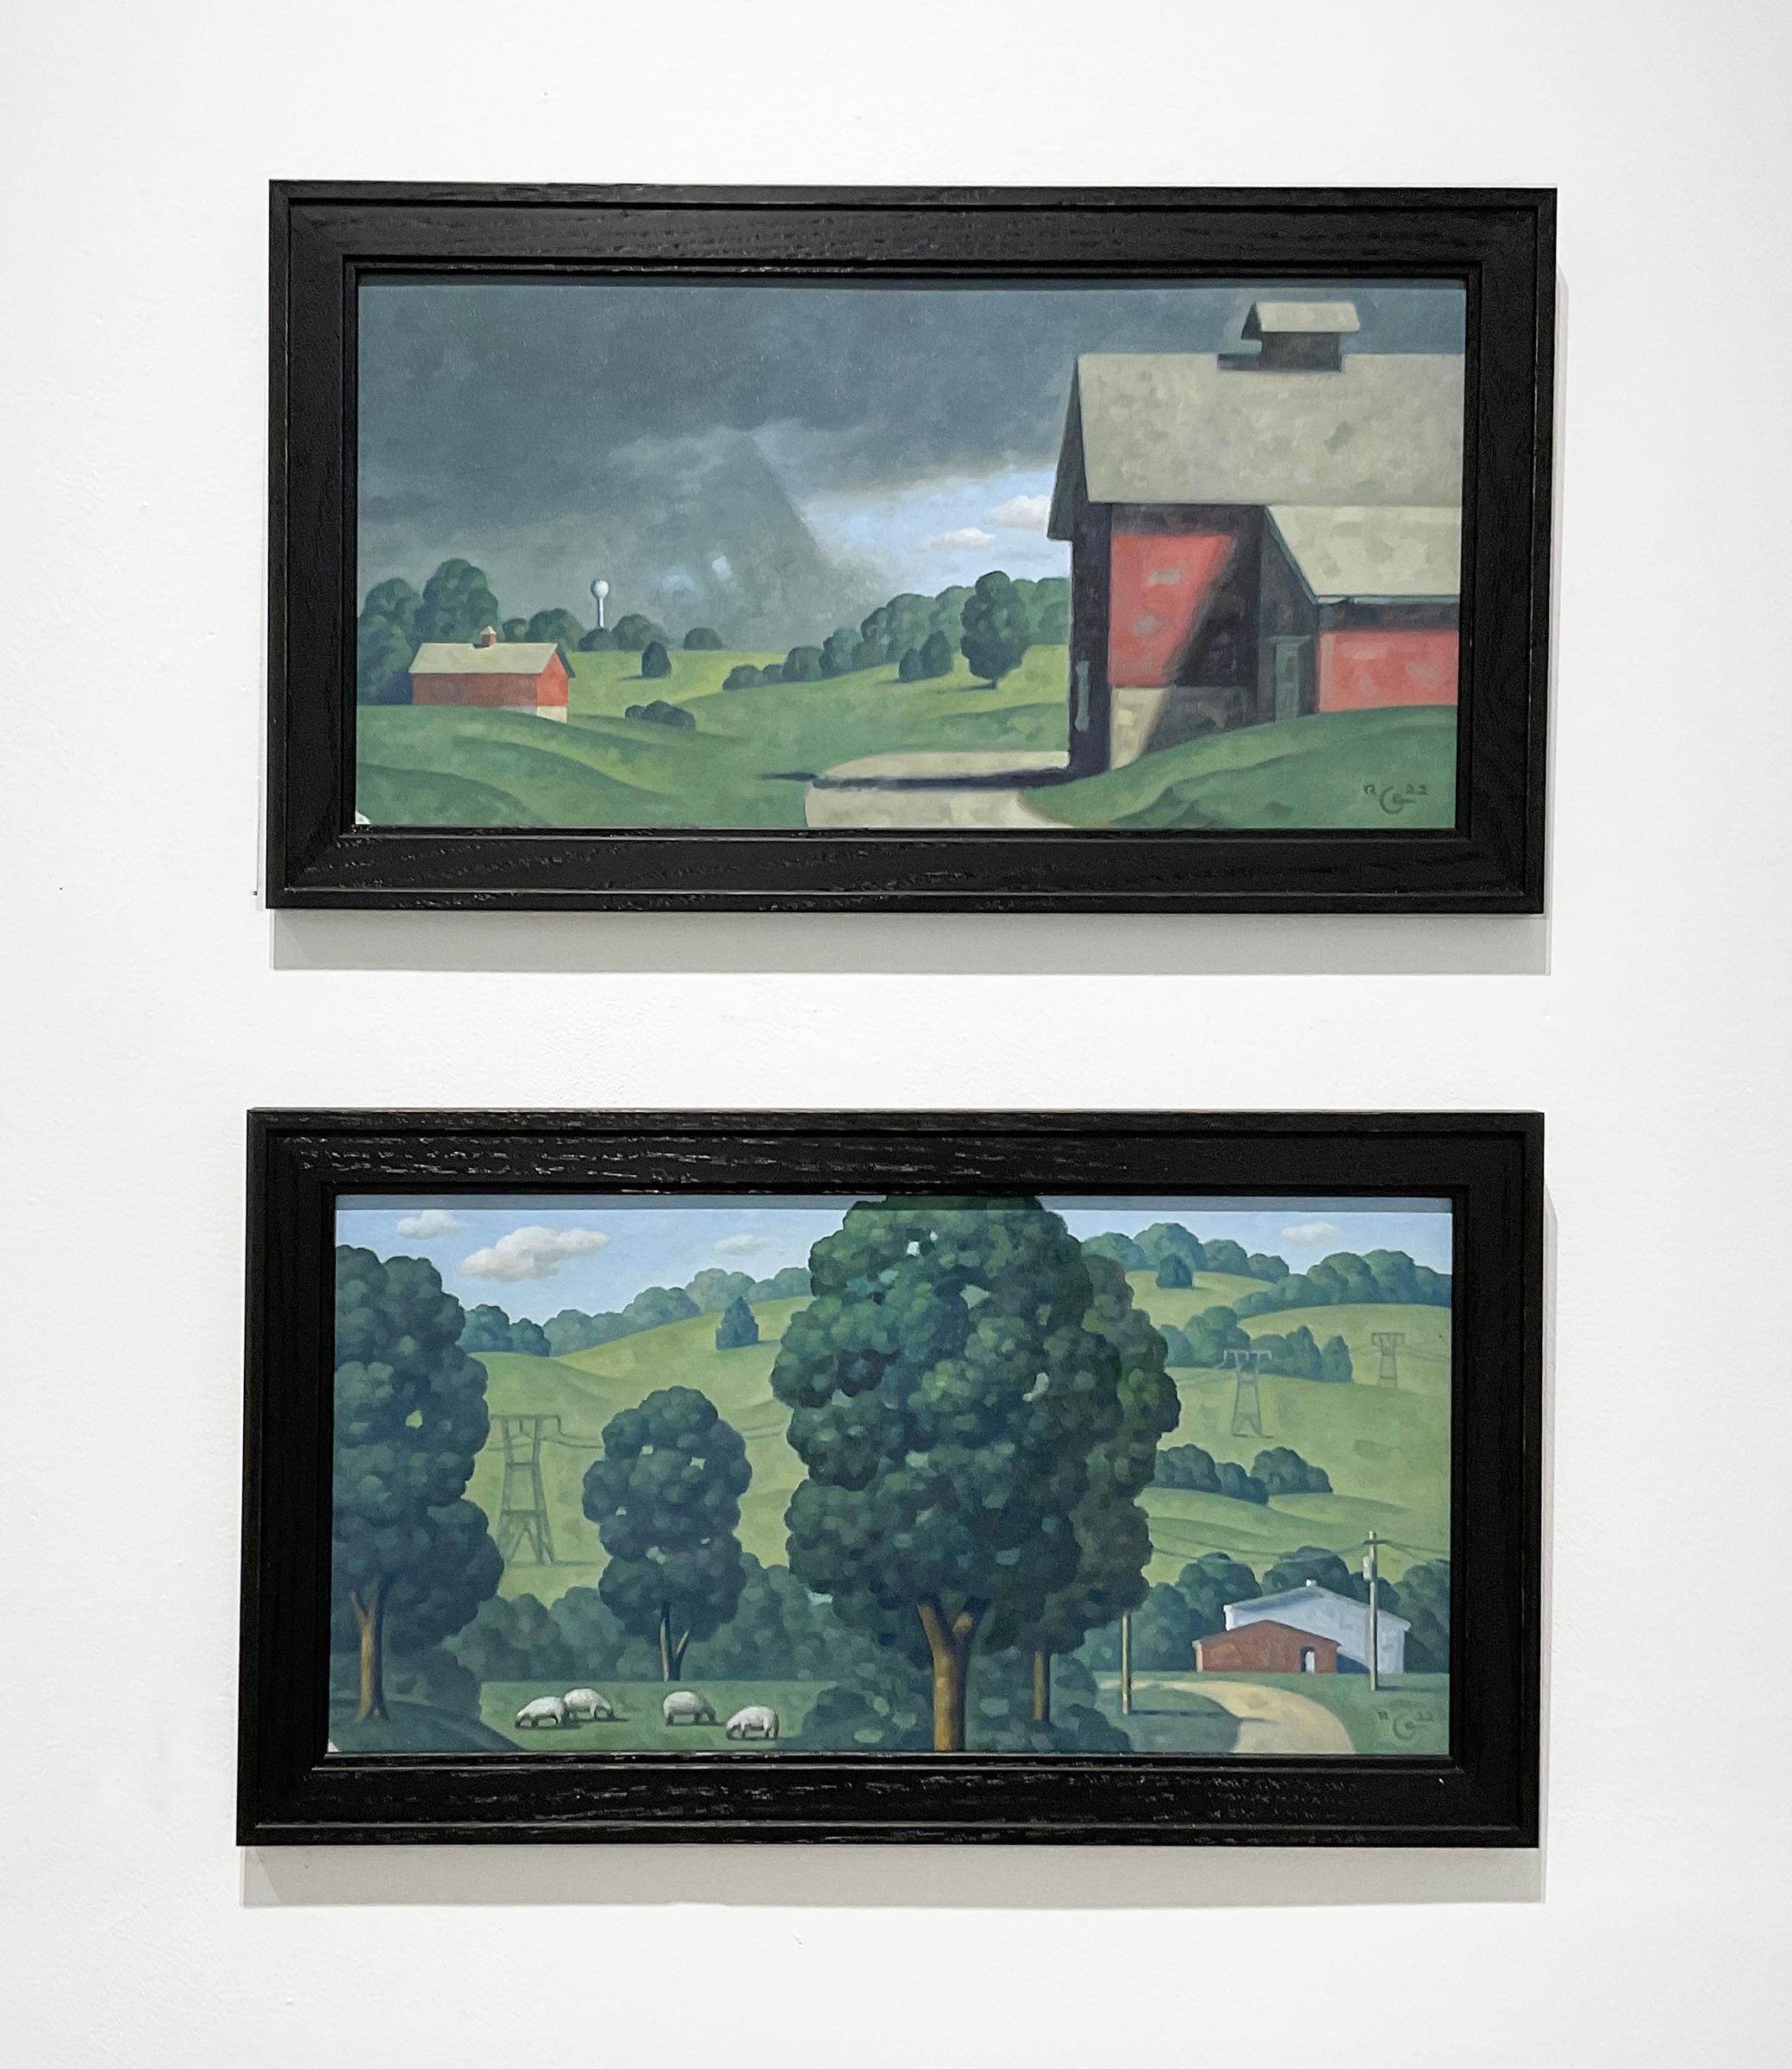 Red Barns, Cherry Valley (Study)
Contemporary Oil Painting of Rural Landscape with Bright Red Barns, a Country dirt road and Water Tower 
Painted by Robert Goldstrom in 2022, 10 x 20 inches, 12.5 x 22.5 inches framed in
black wood frame
(The artist